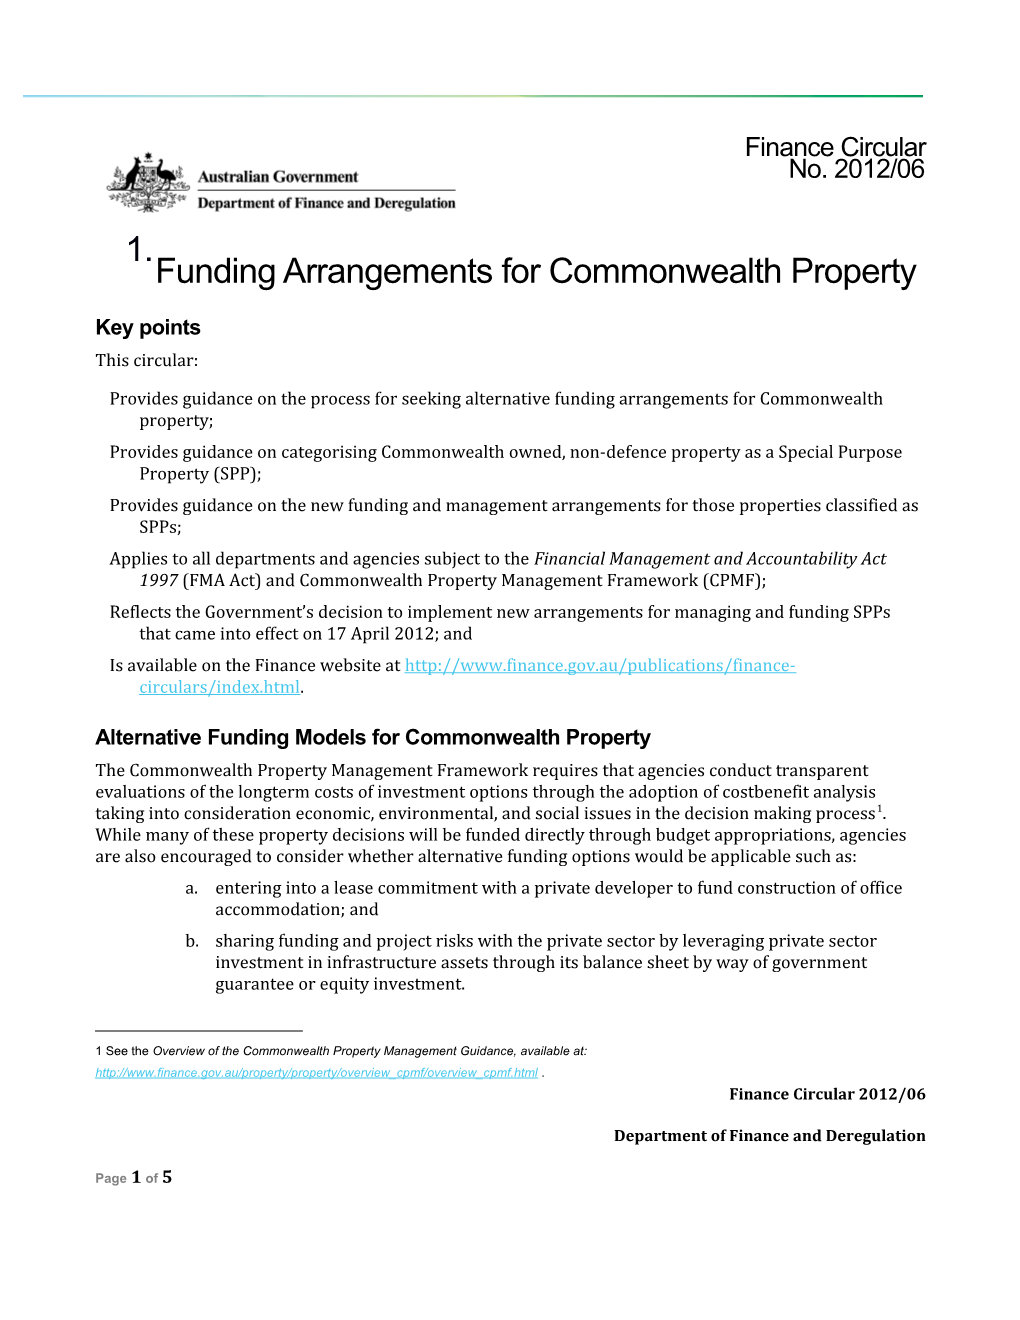 Finance Circular No. 2012/06 Funding Arrangements for Commonwealth Property